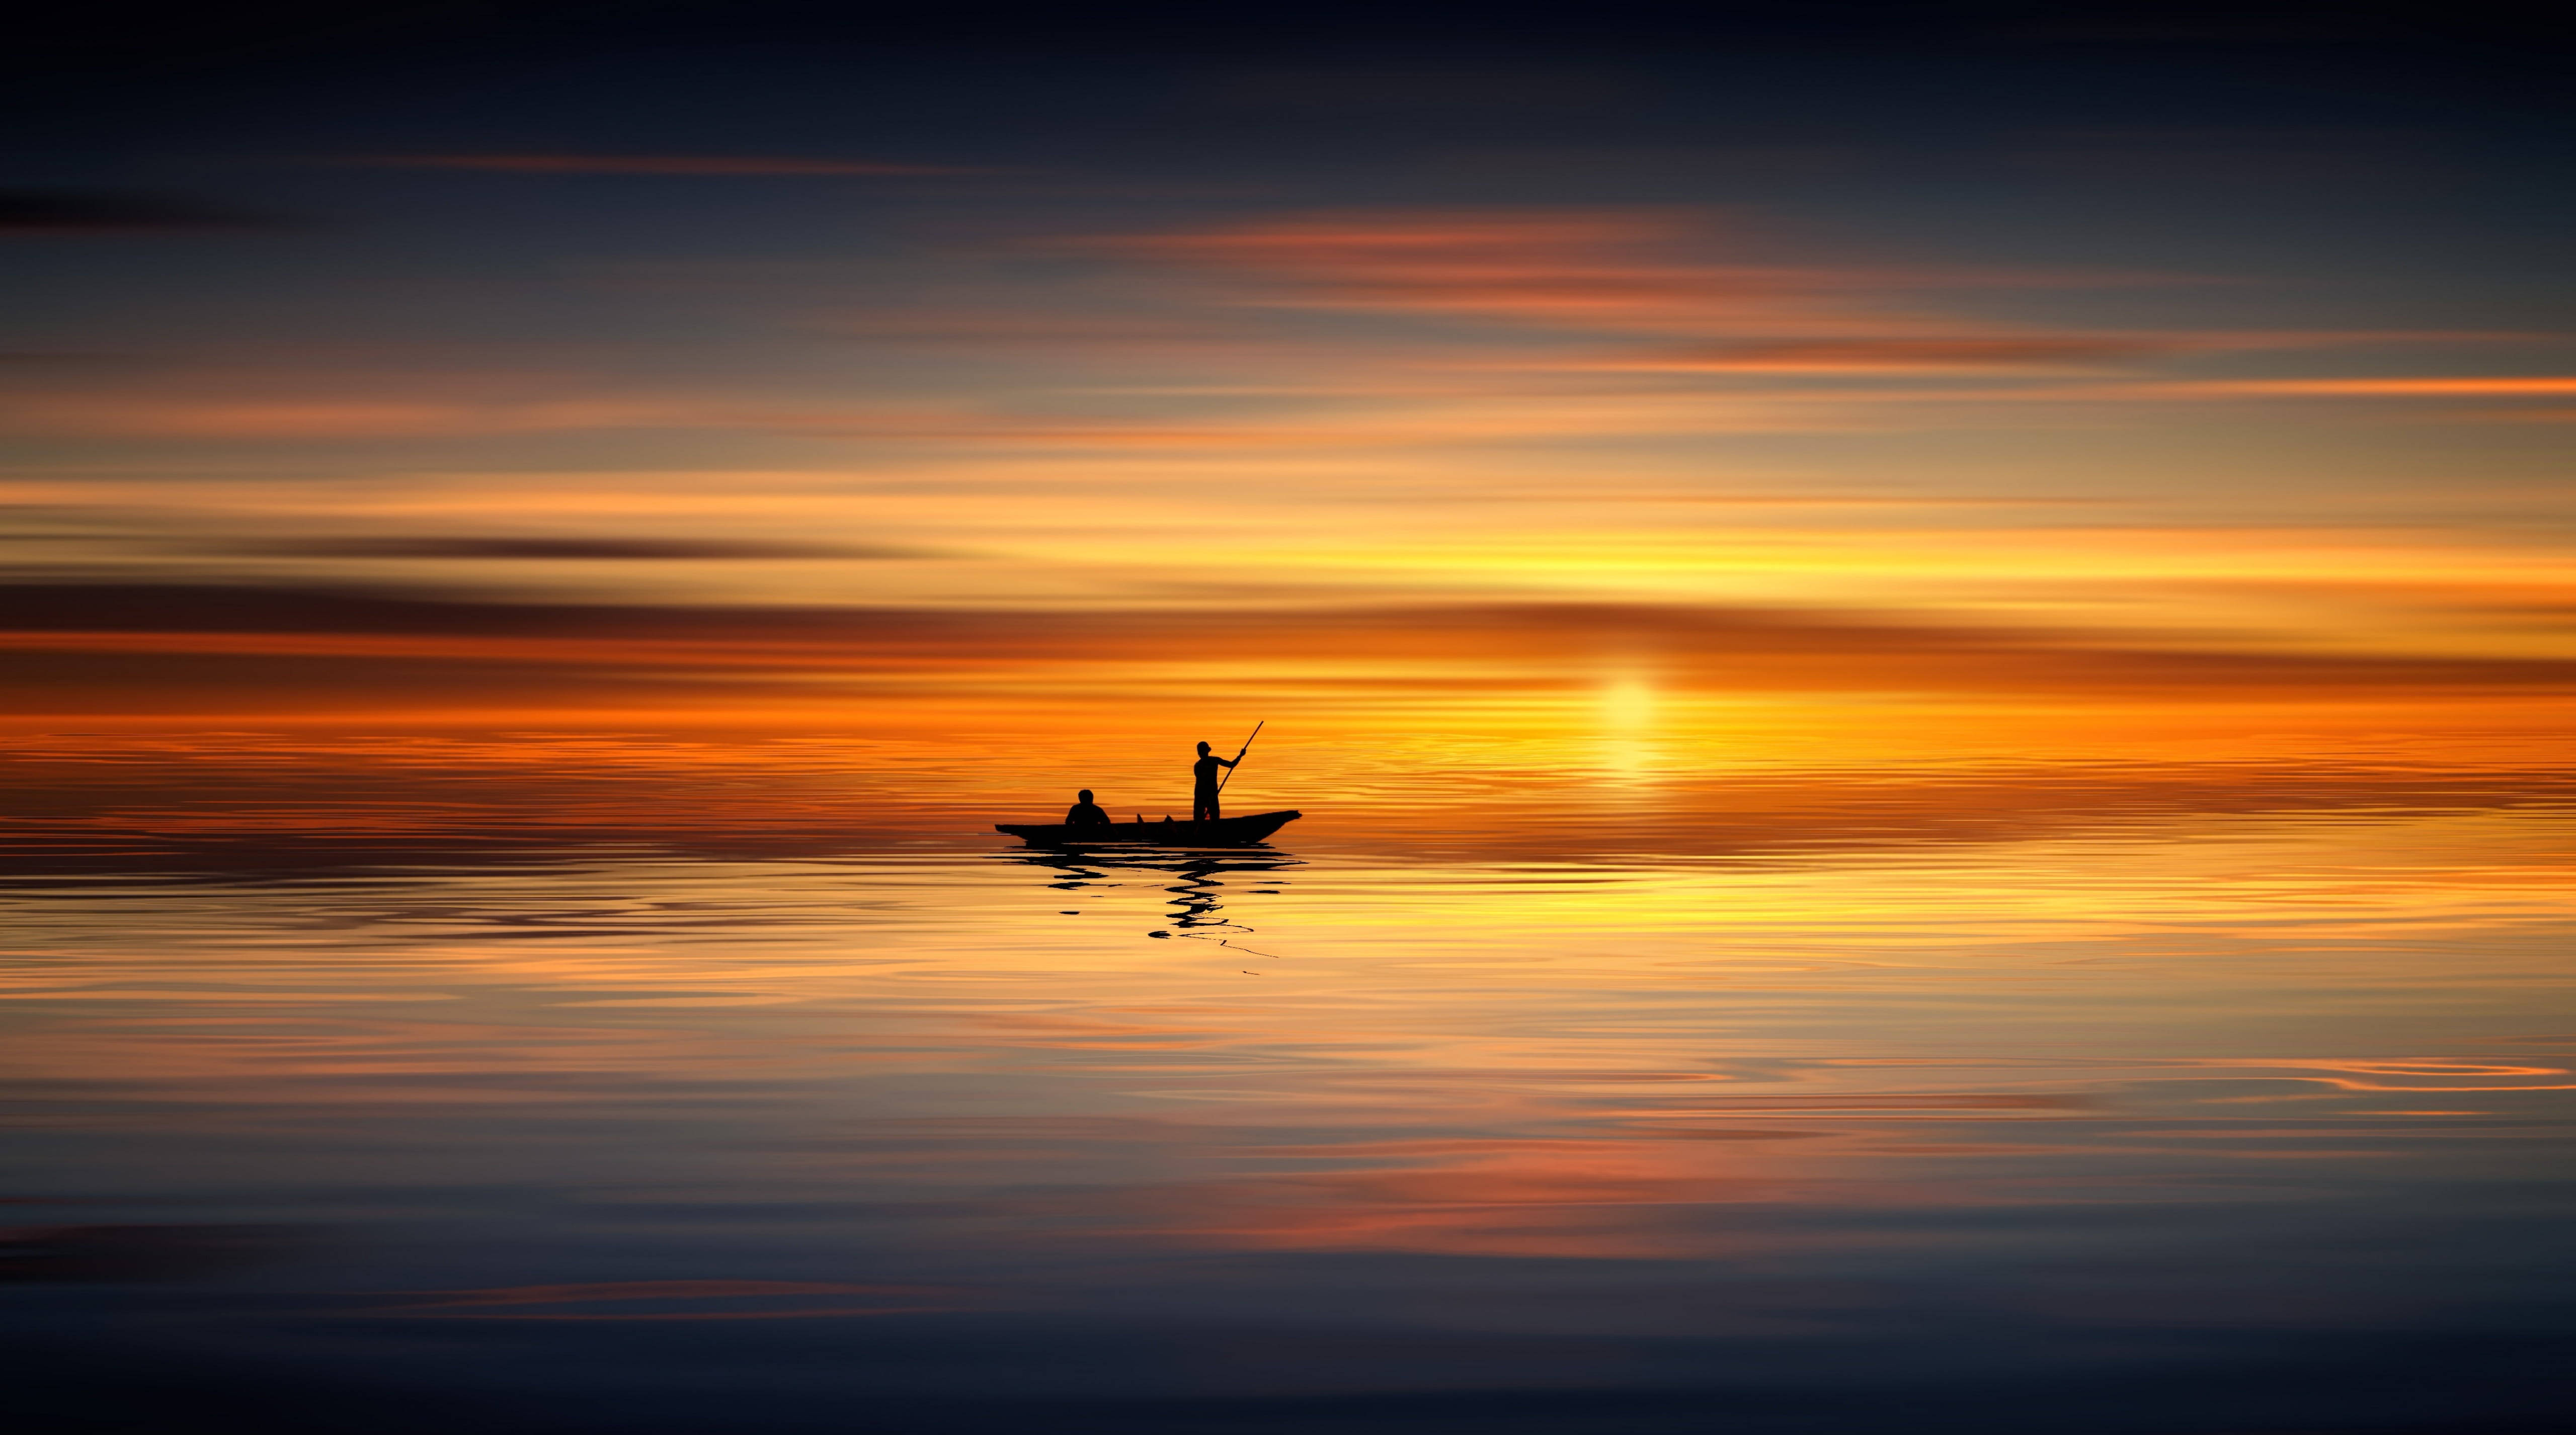 Aesthetic Sunset With Man On Boat Silhouette Background